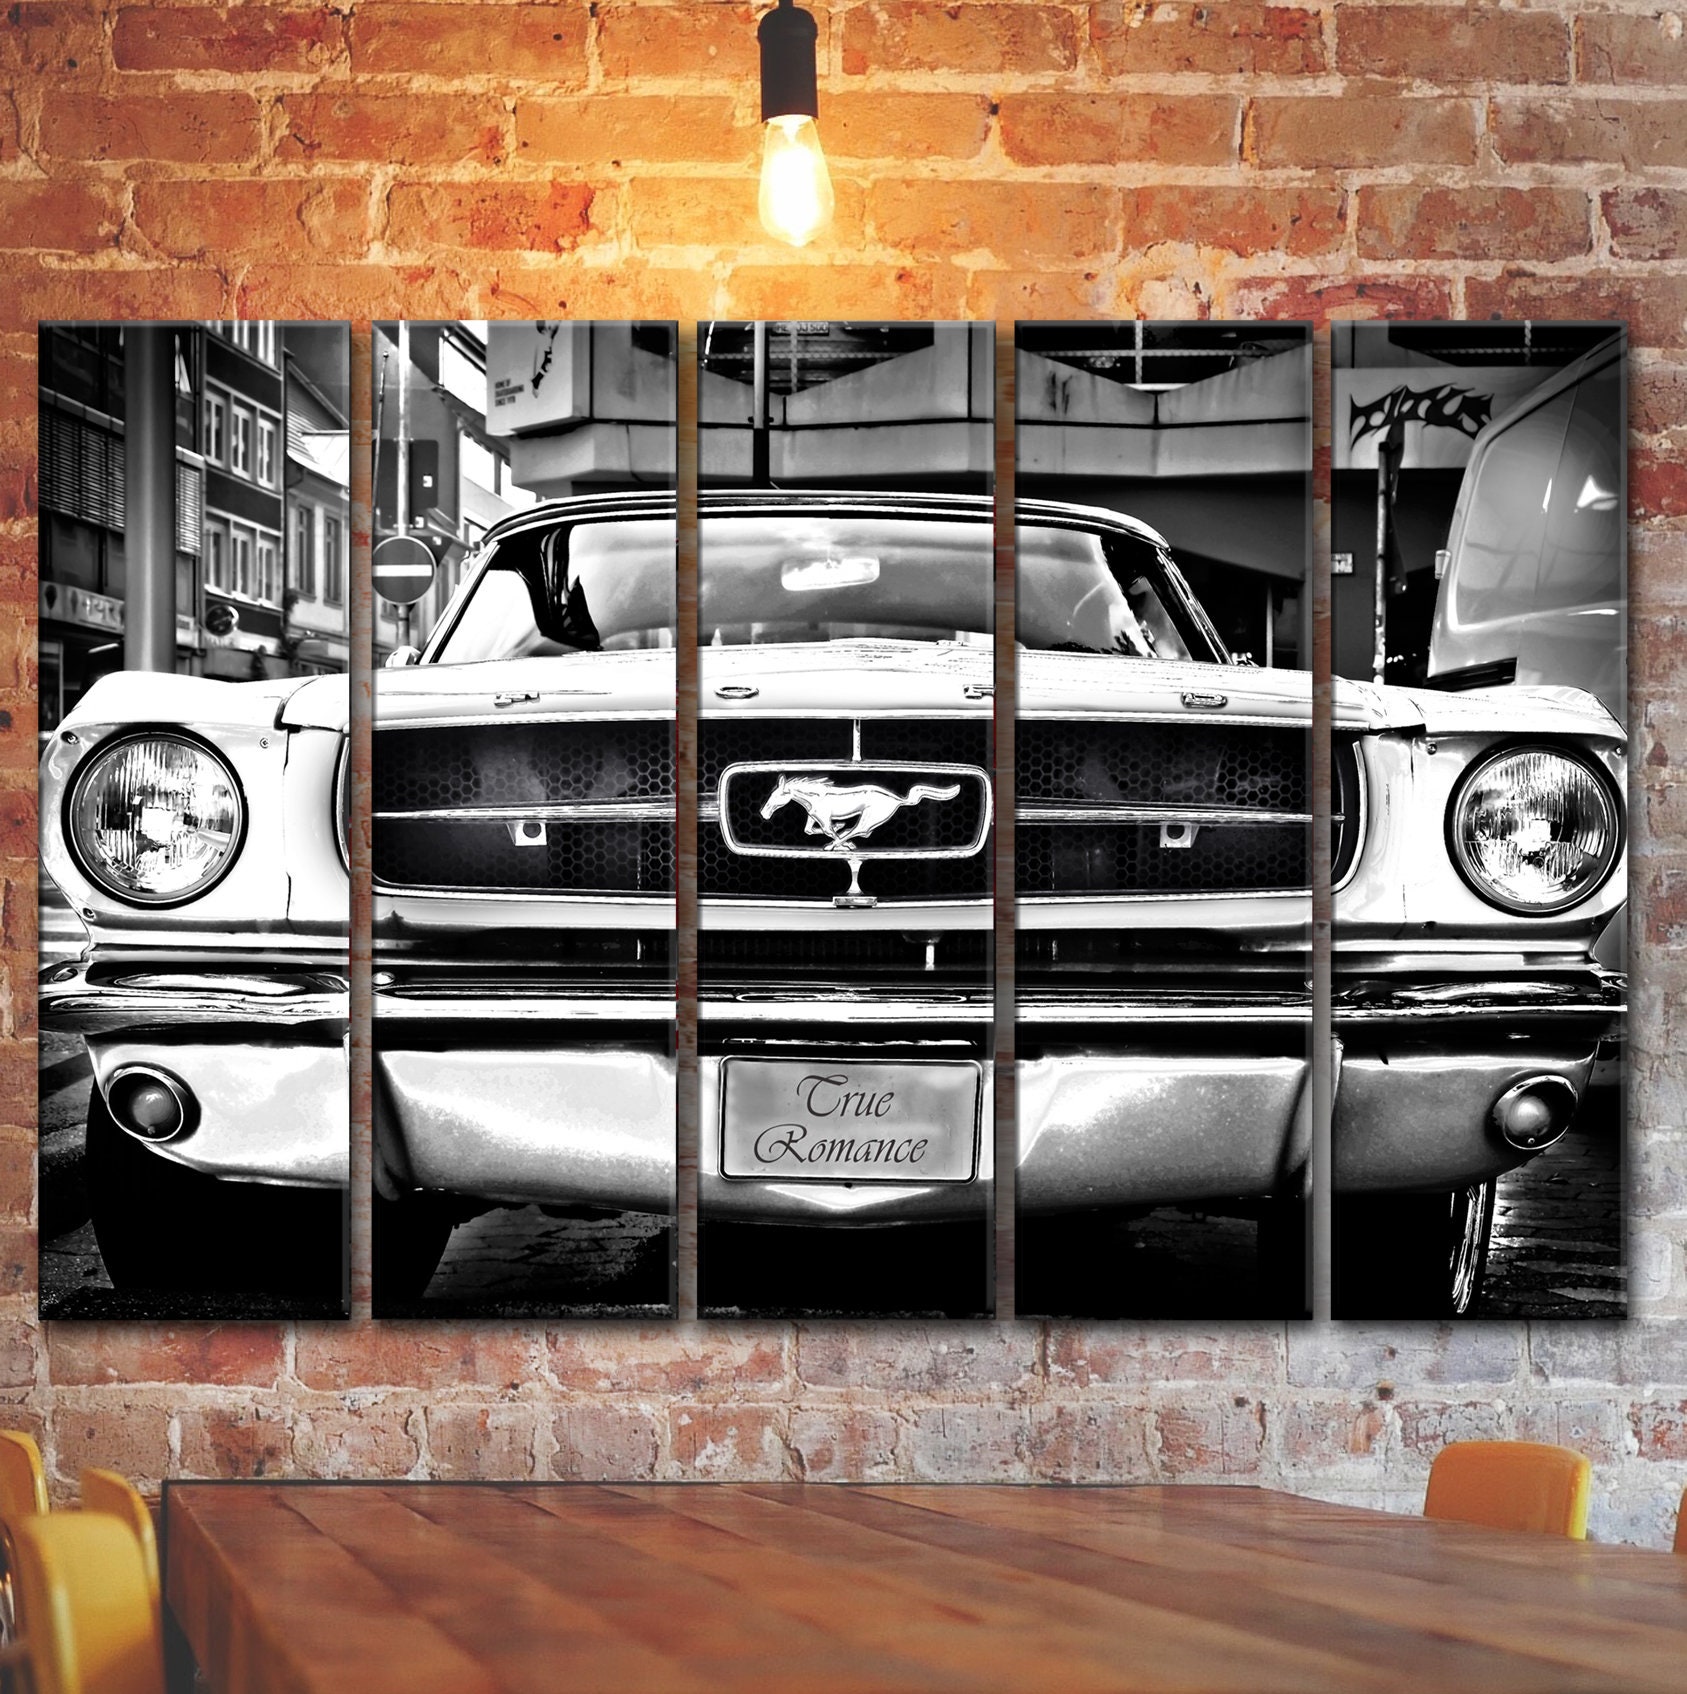 Great Audi Car Gift! Custom Car Art Engraved on Metal Acrylic or Wood Ford Mustang 1964 Convertible Laser Engraved Wall Art Sign